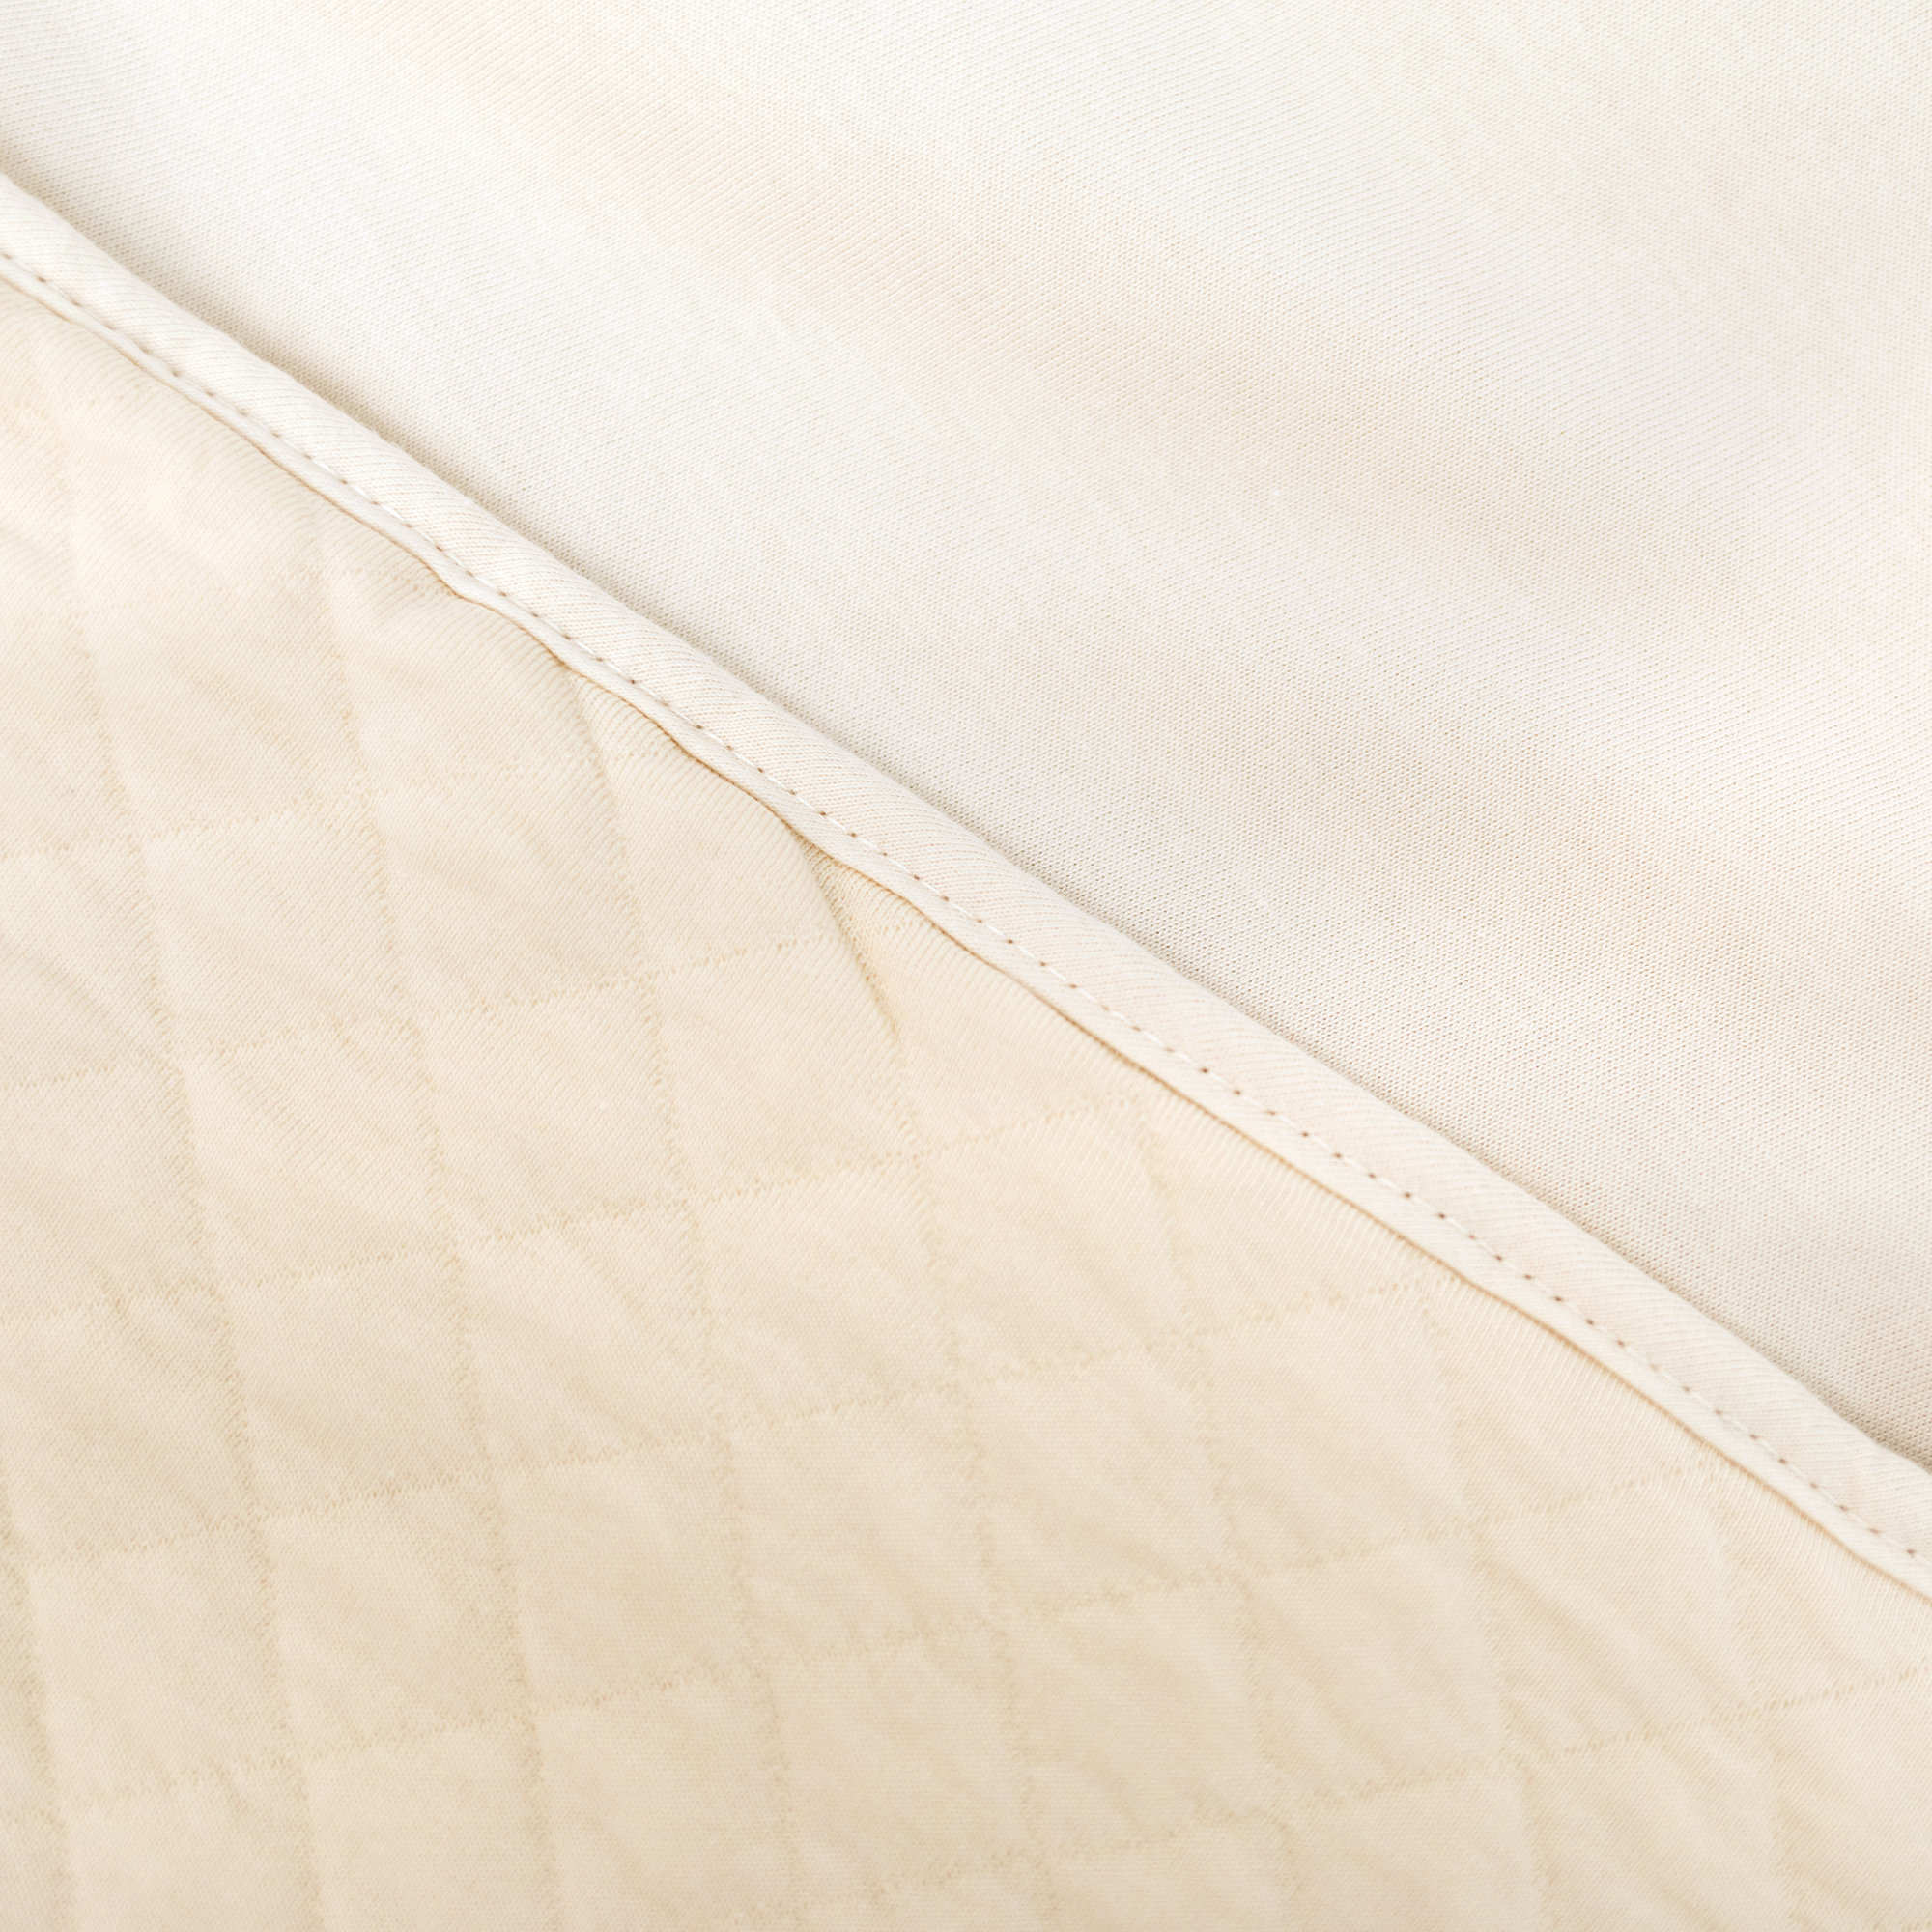 Couverture Pady quilted + jersey 75x100cm QUILT Cream tog 3